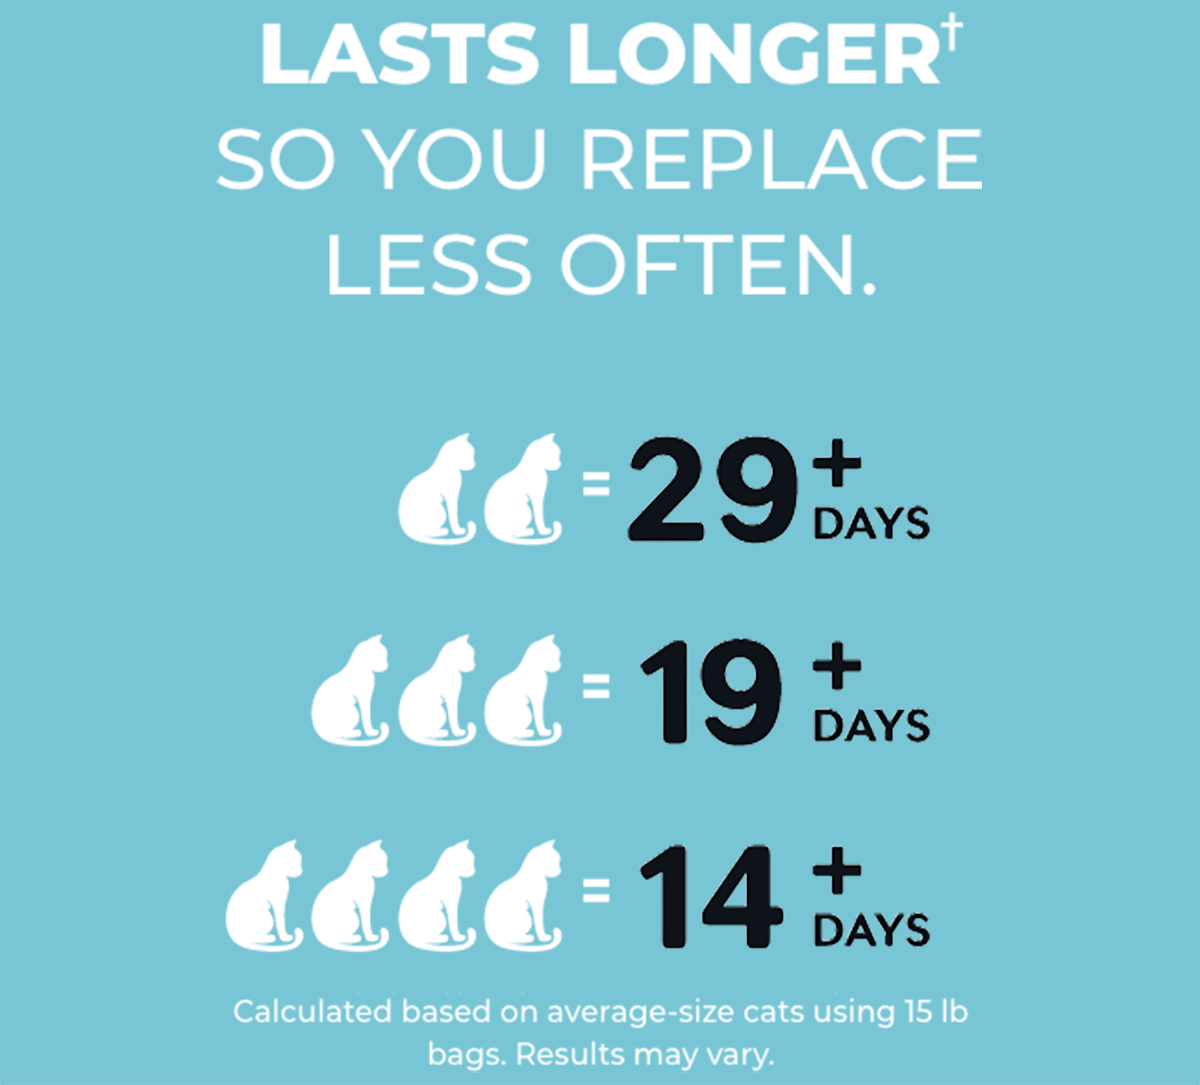 Lasts longer† so you replace less often. ( 2 cats = 29+ days. 3 cats = 19+ days. 4 cats = 14+ days. ) * Calculated based on average-size cats using 15 lb bags. Results may vary.